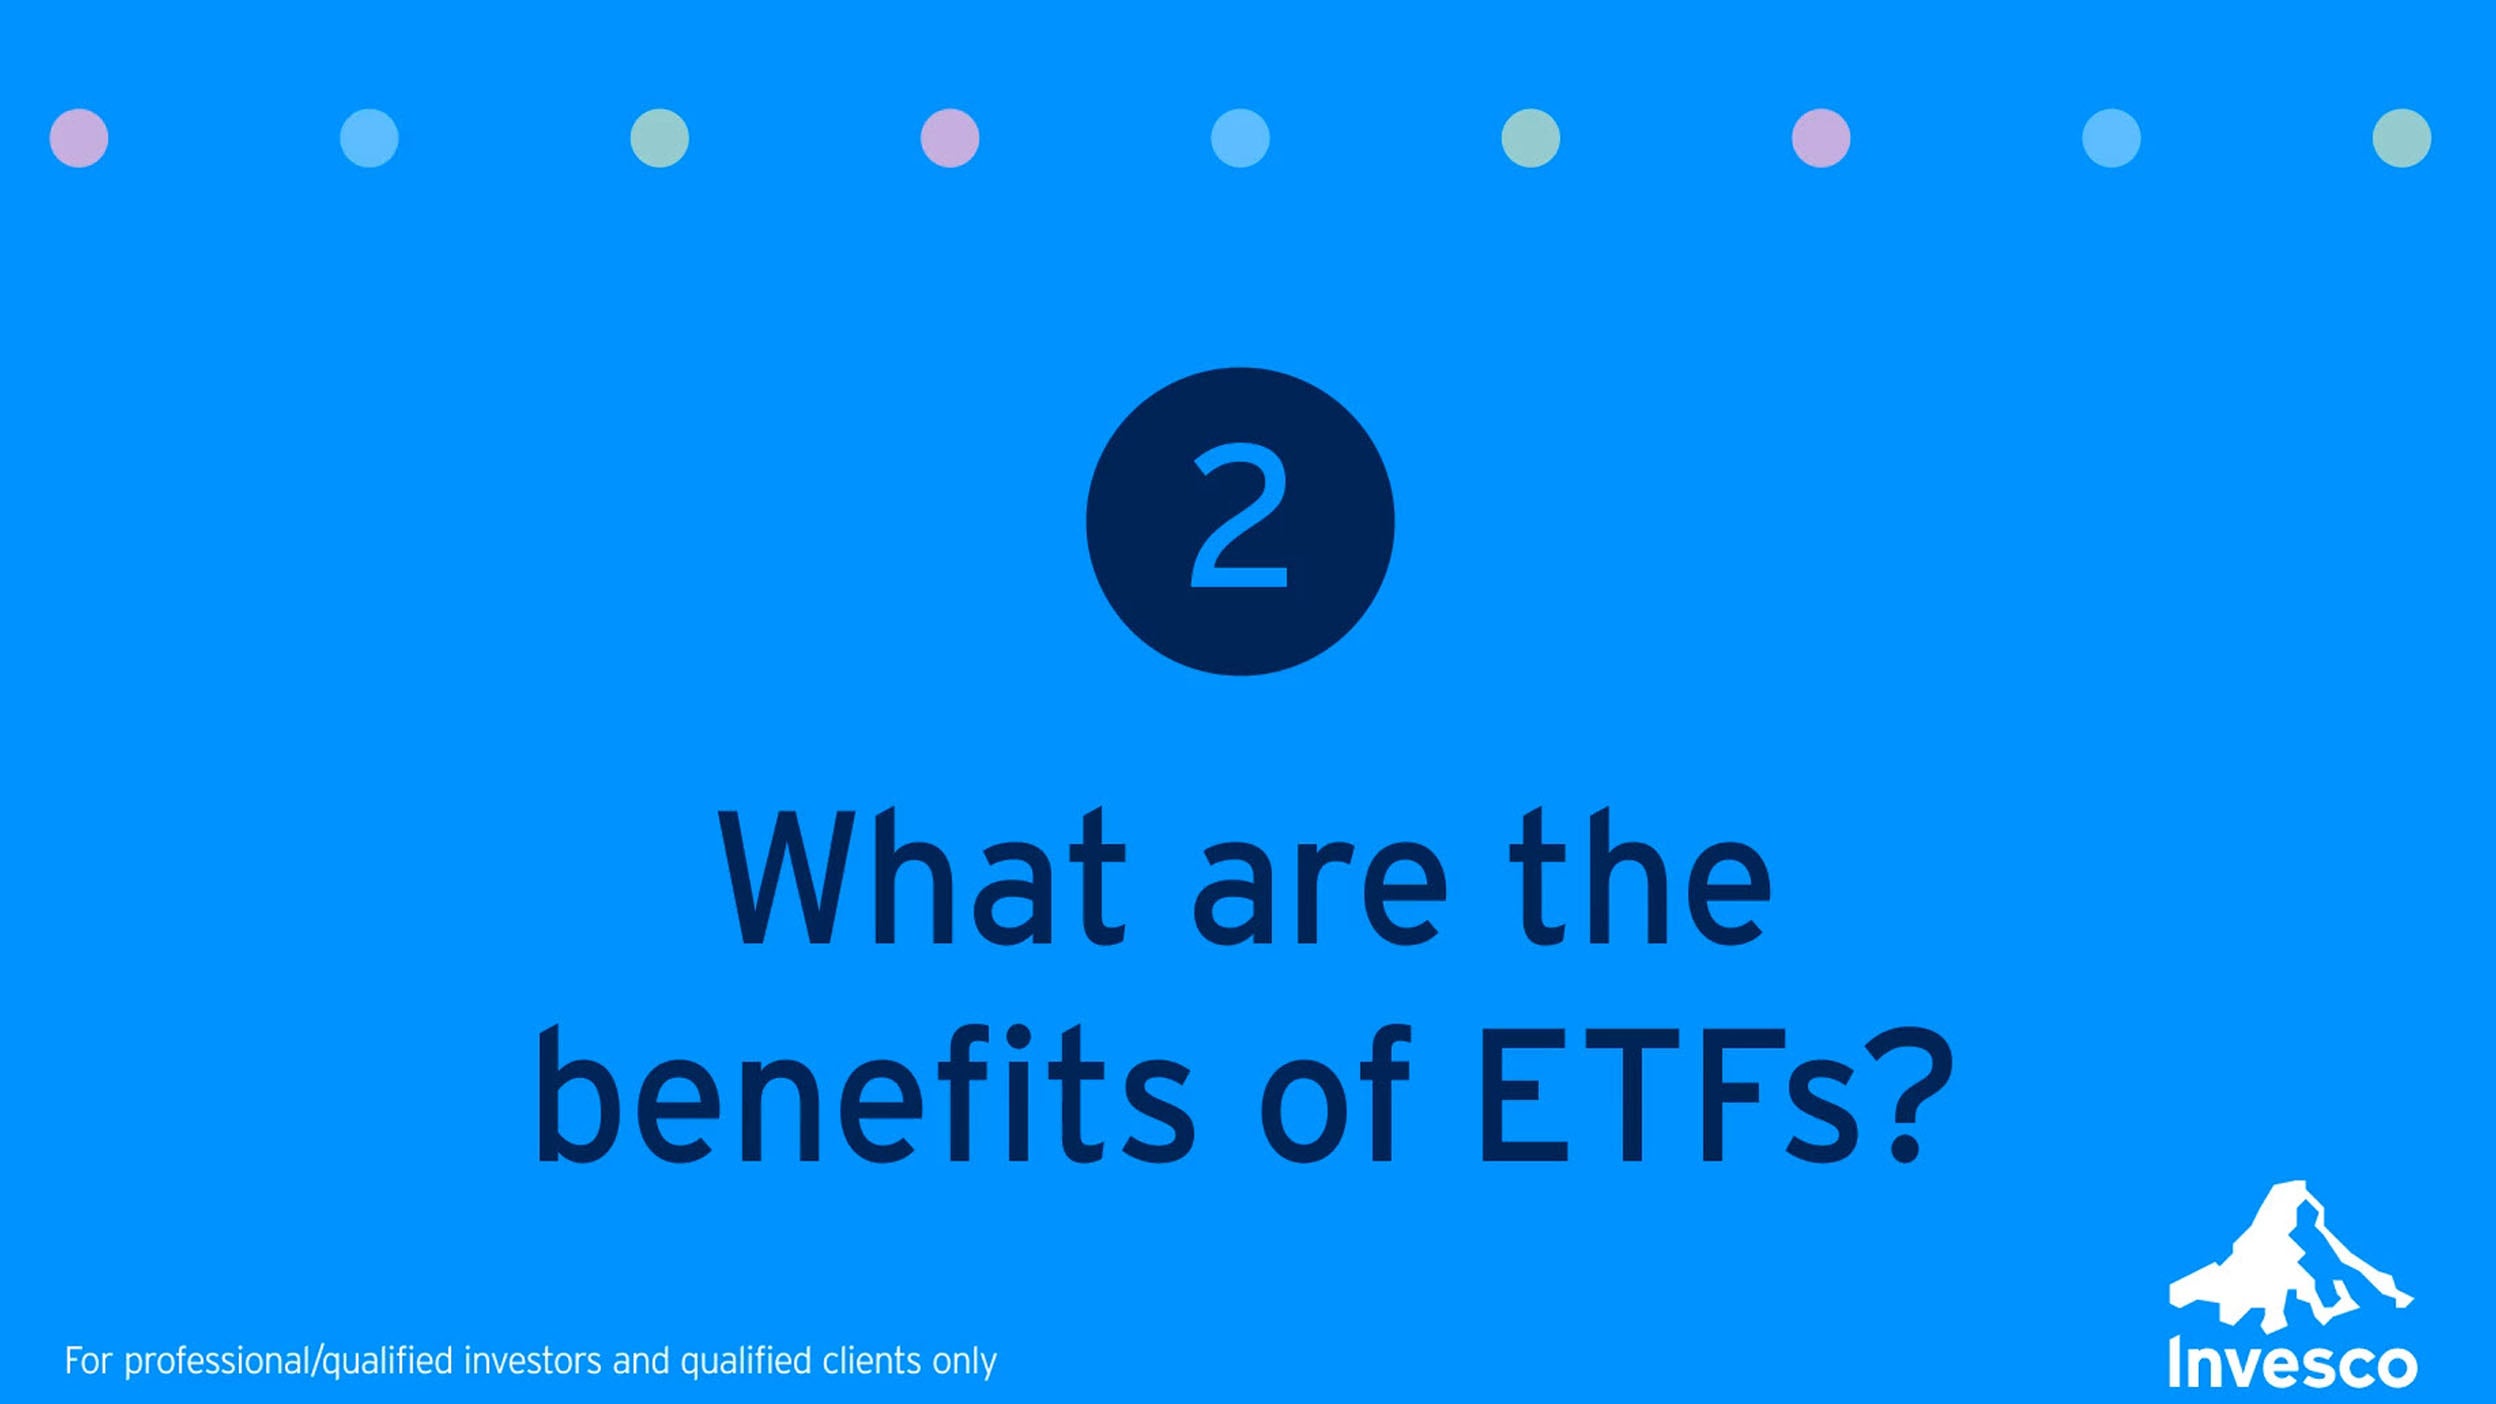 What are the benefits of ETFs?